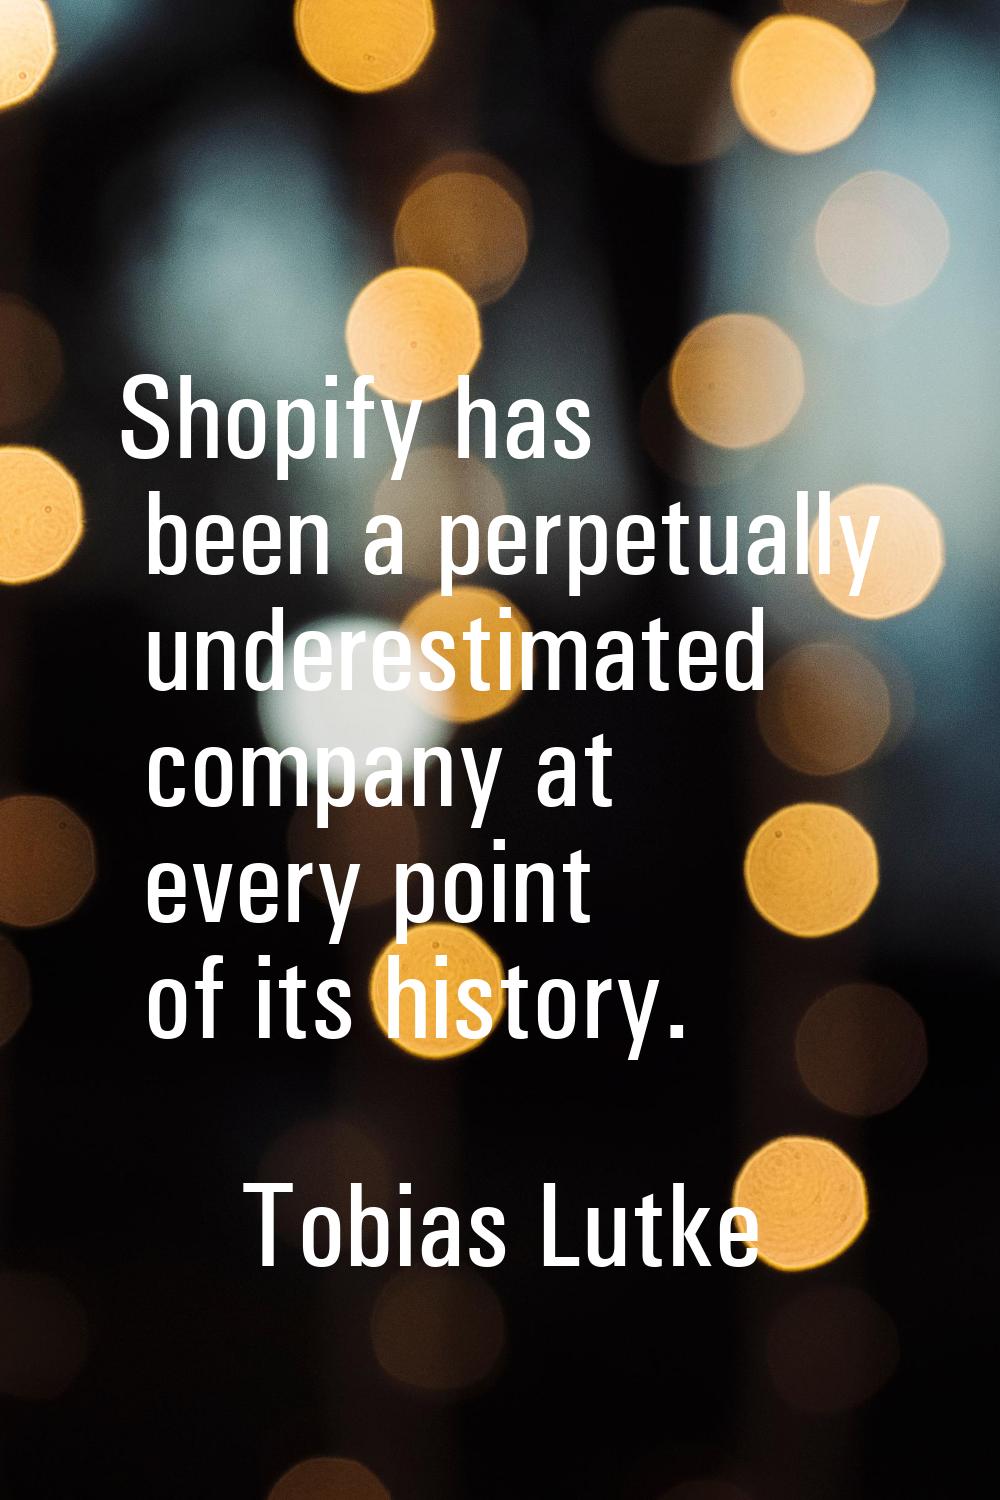 Shopify has been a perpetually underestimated company at every point of its history.